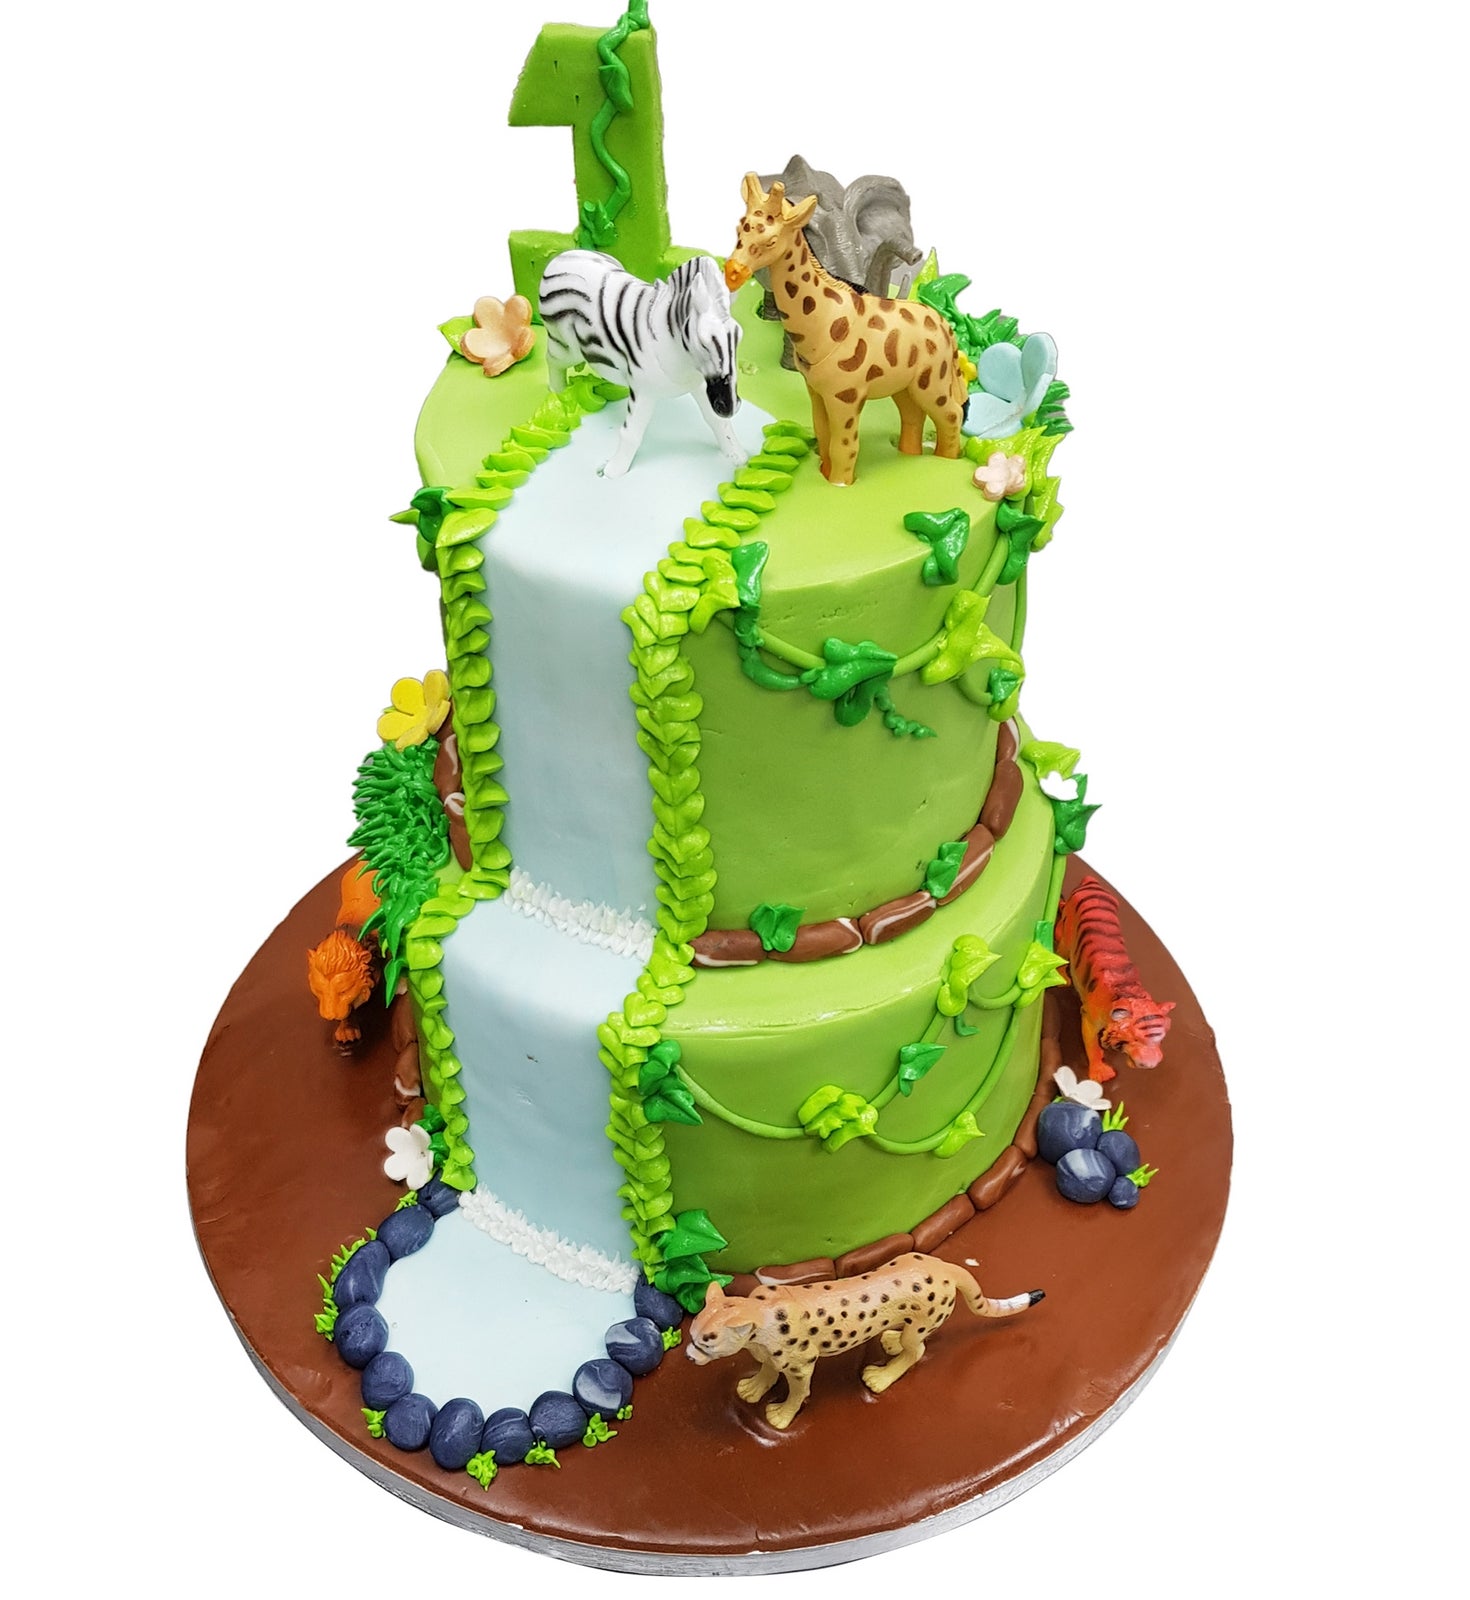 30 Pack Forest Theme Cartoon Animal Restaurant Cake Topper For Party  Decoration, Baby Shower, Childrens Party, School Event, Backdrop Arch, And  Festive Supplies From Wuxiaojing, $15.01 | DHgate.Com